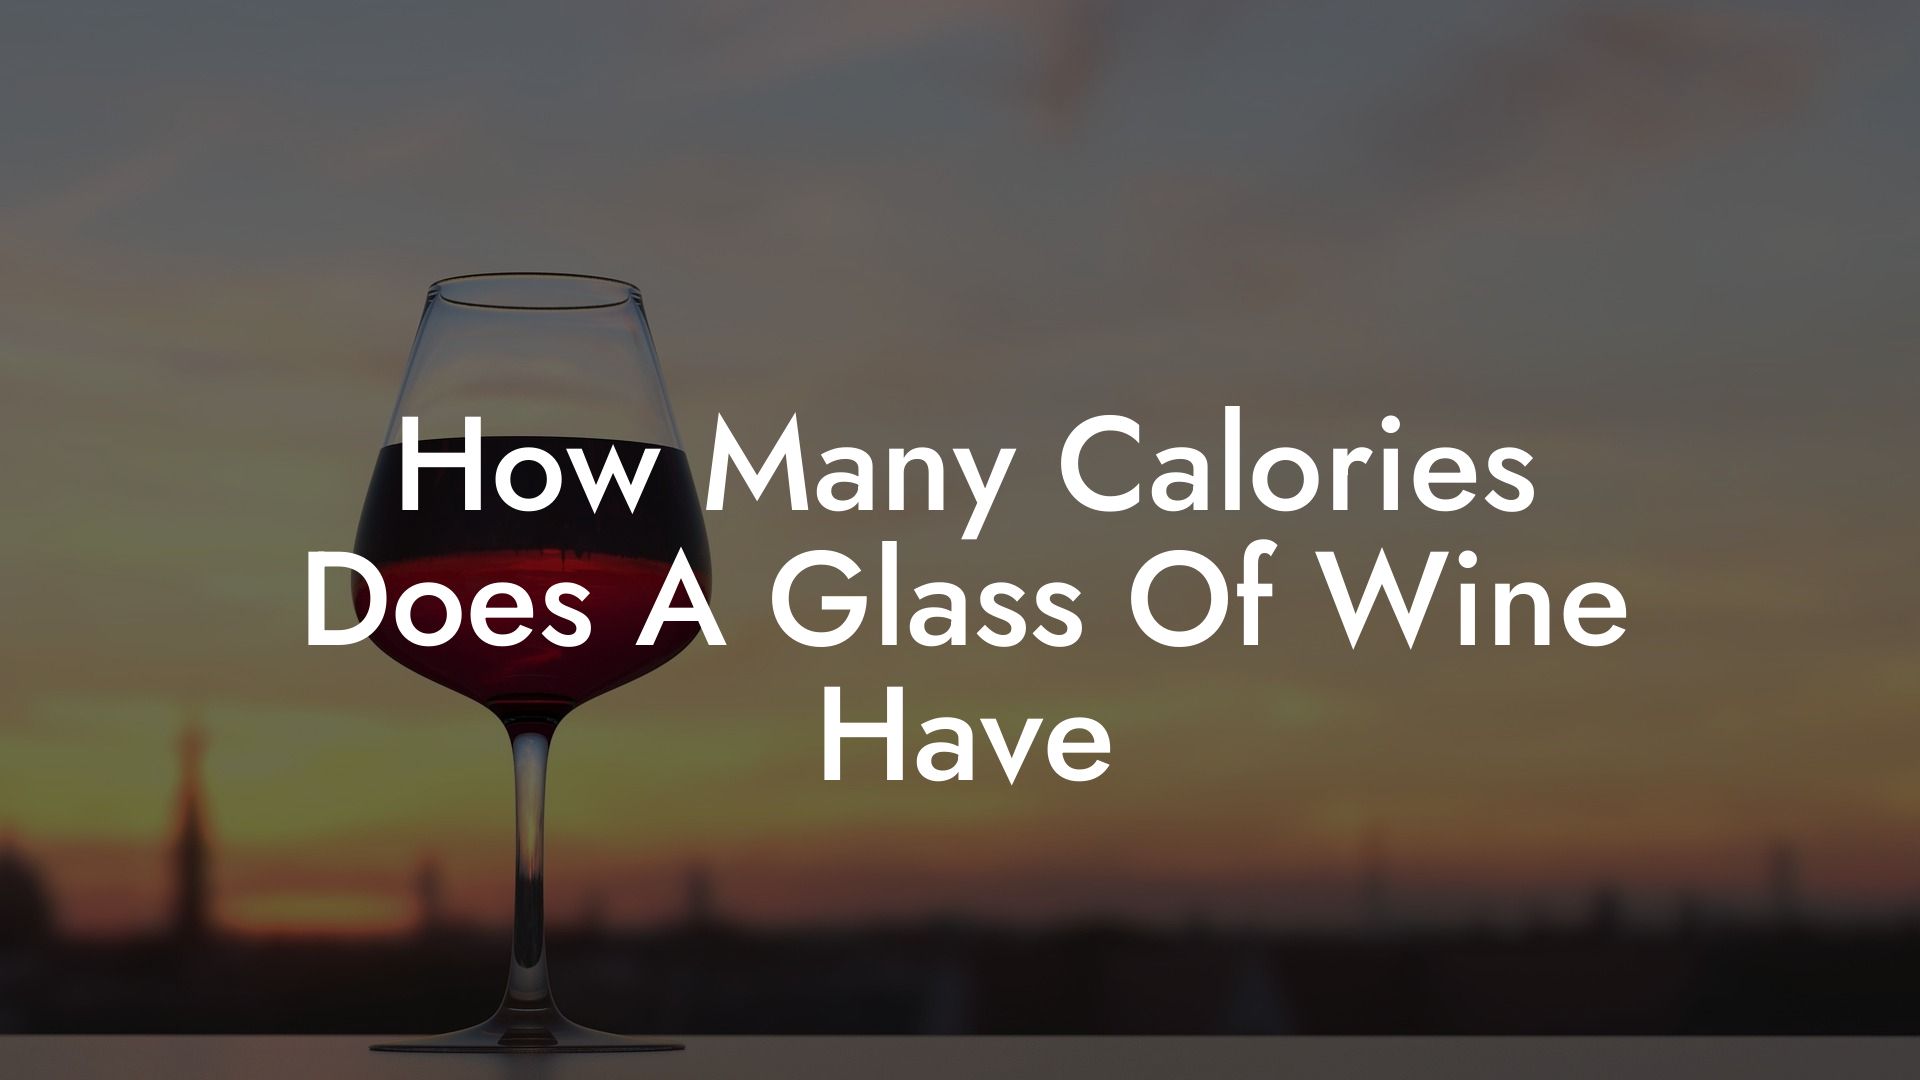 How Many Calories Does A Glass Of Wine Have